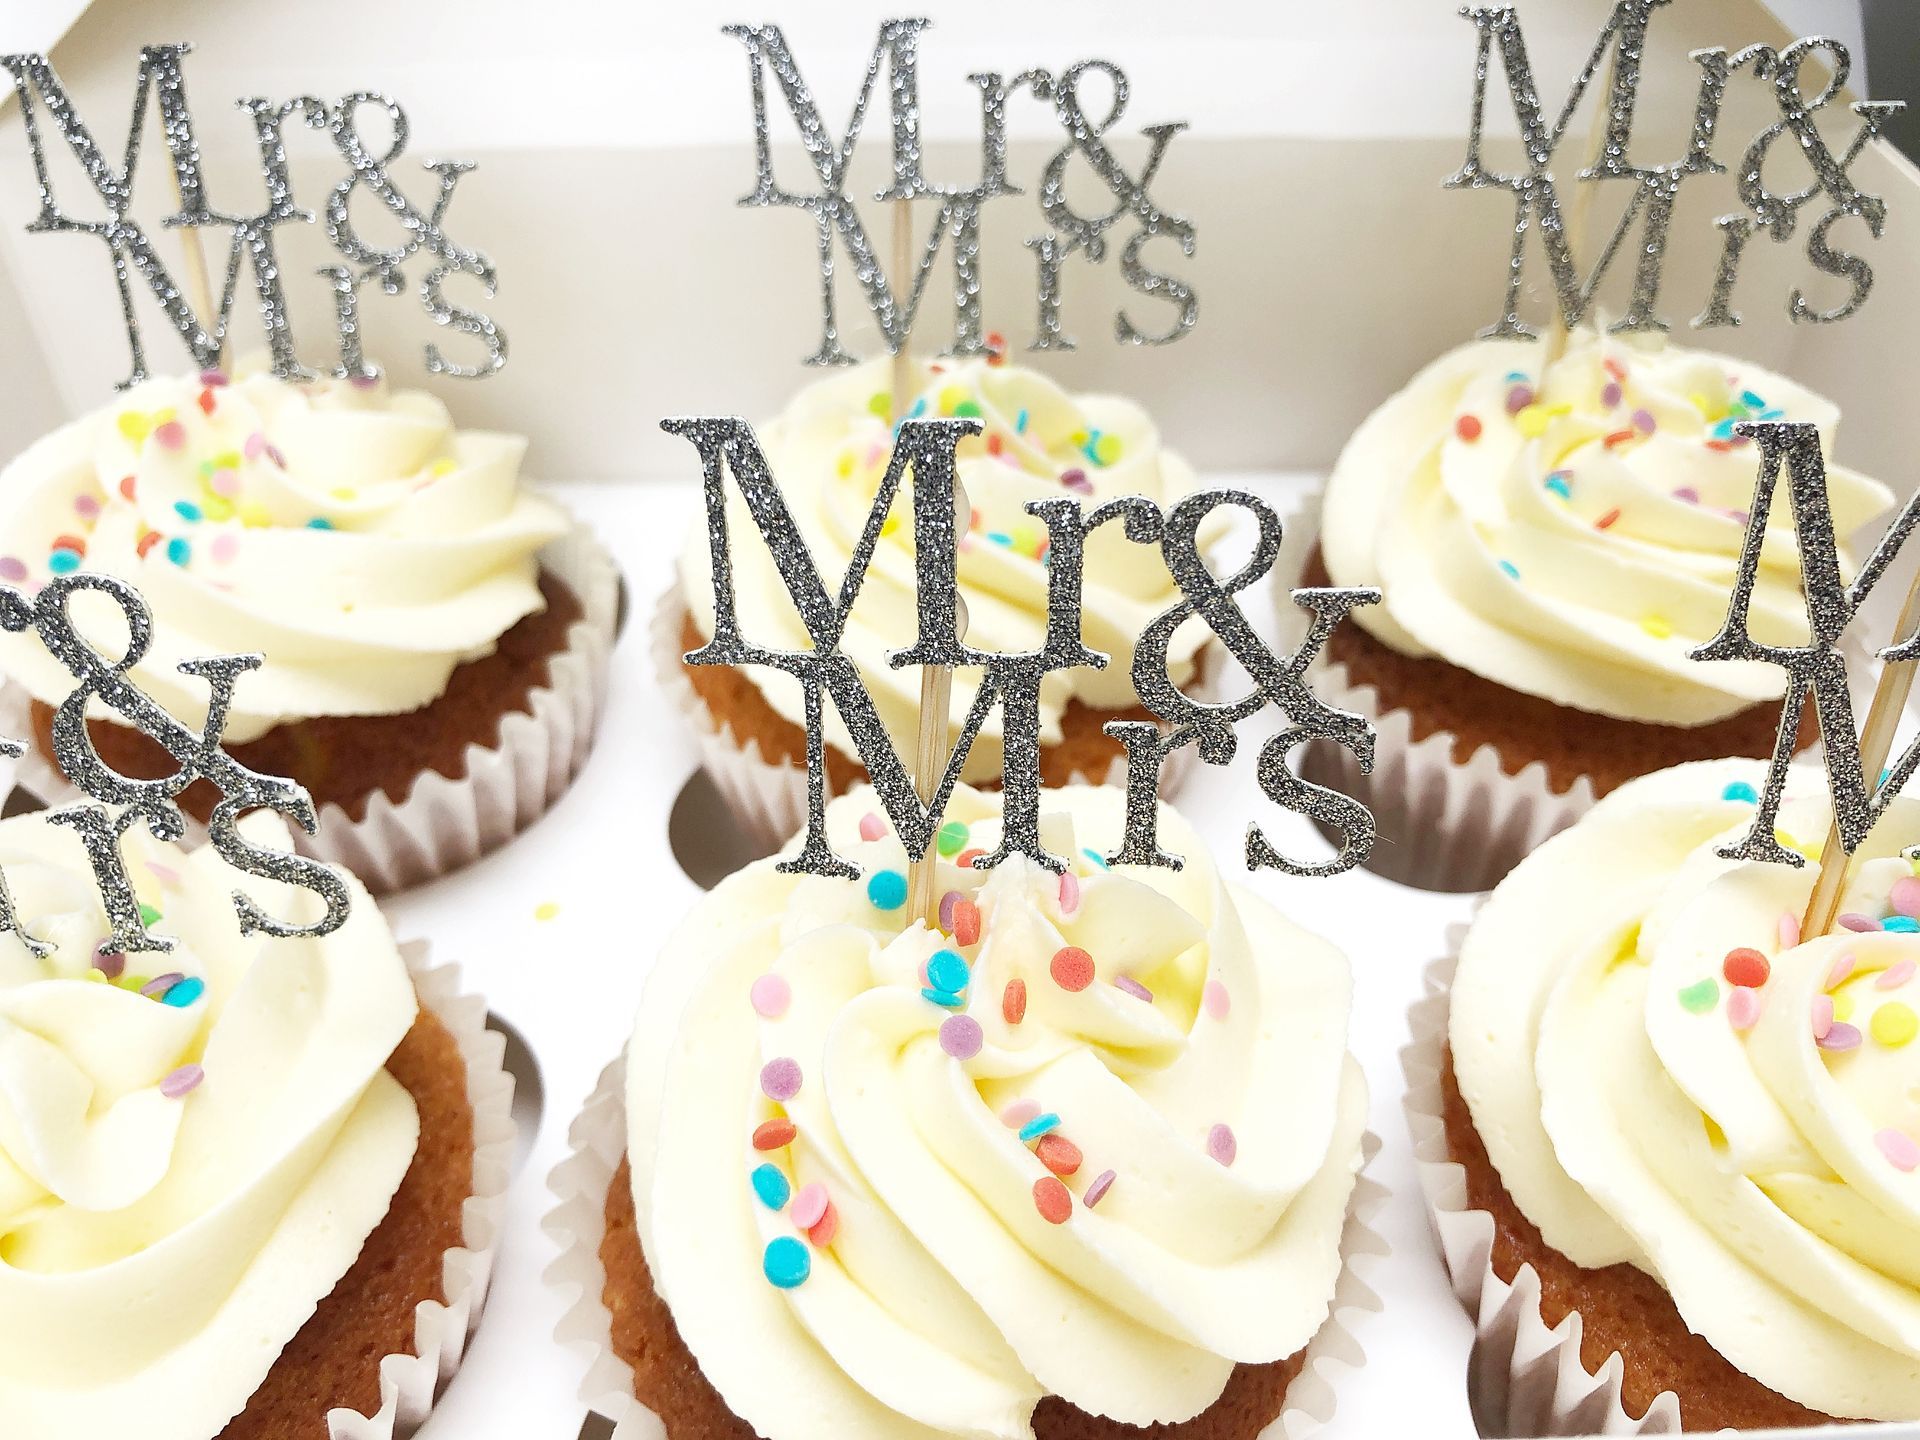 Vanilla Cupcakes with confetti sprinkles and Mr & Mrs cake toppers in silver.